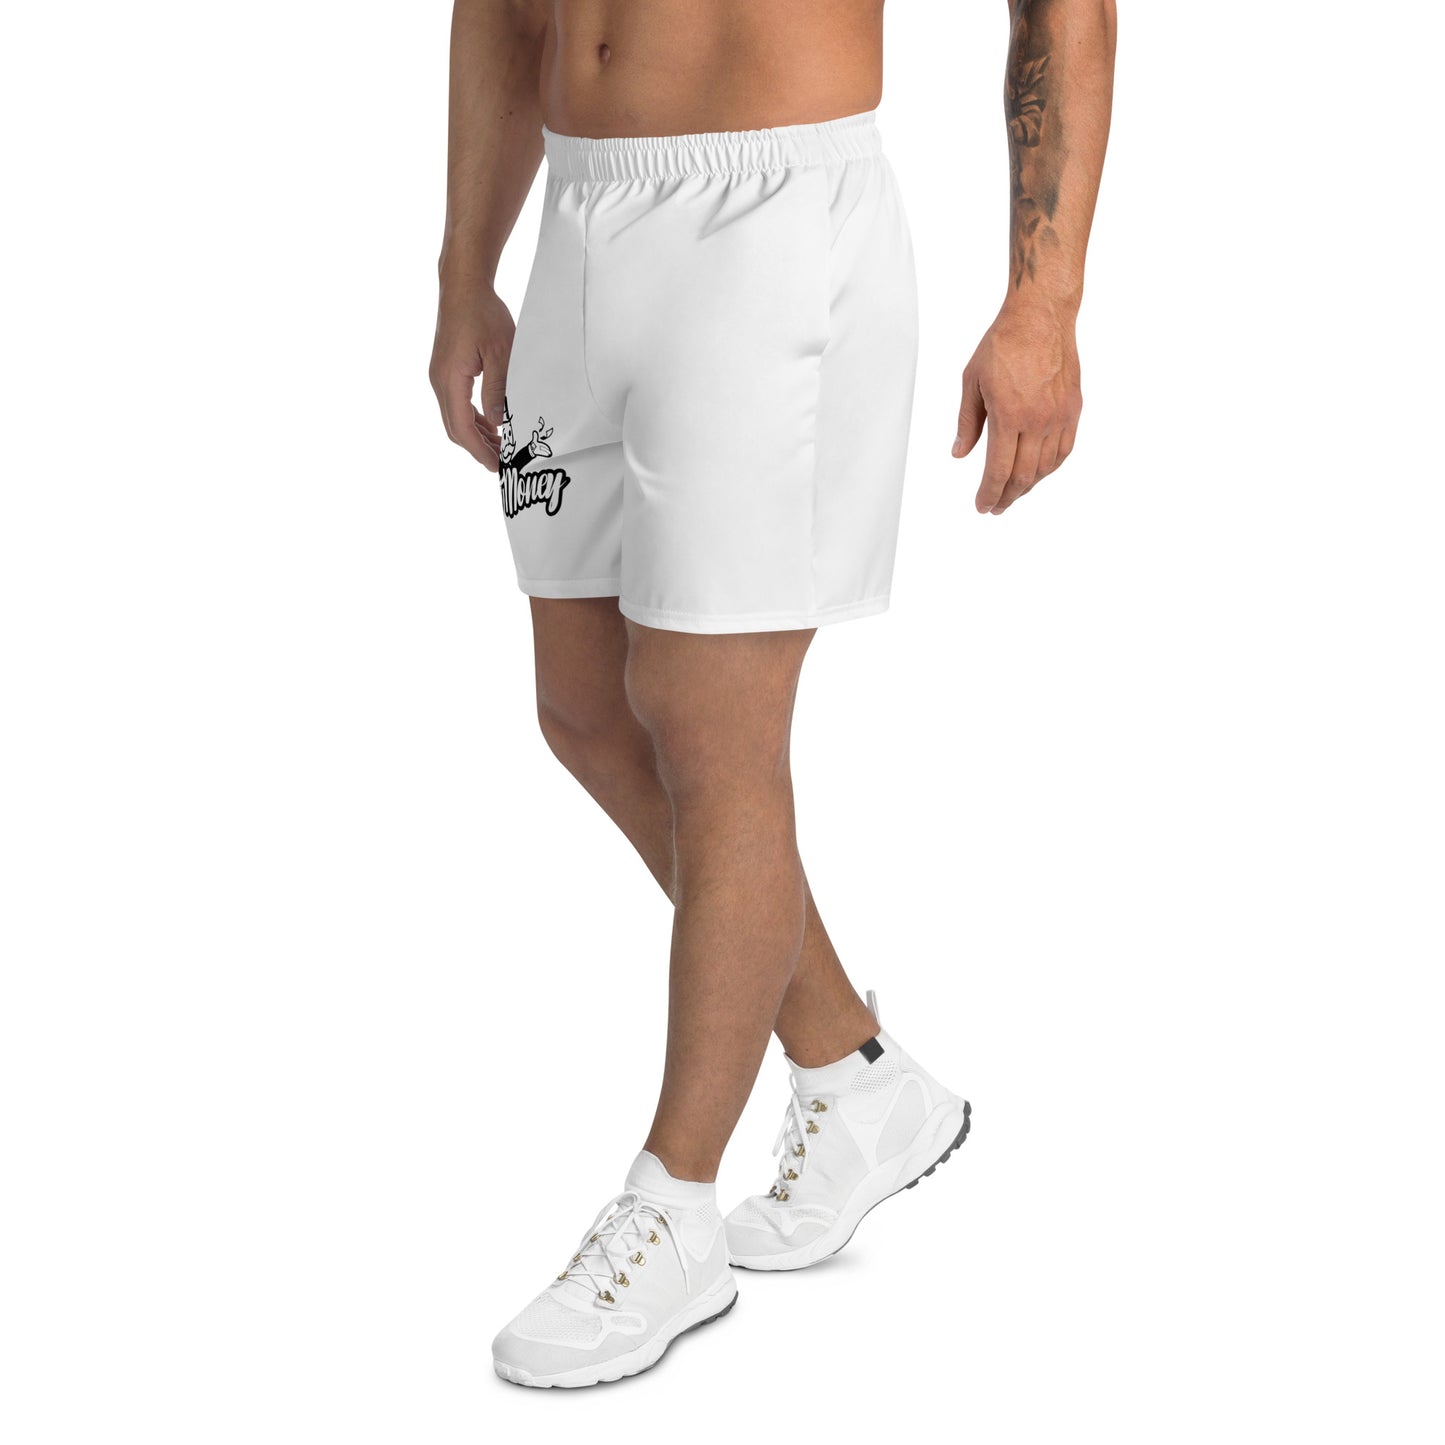 Rent Money Men's Recycled Athletic Shorts